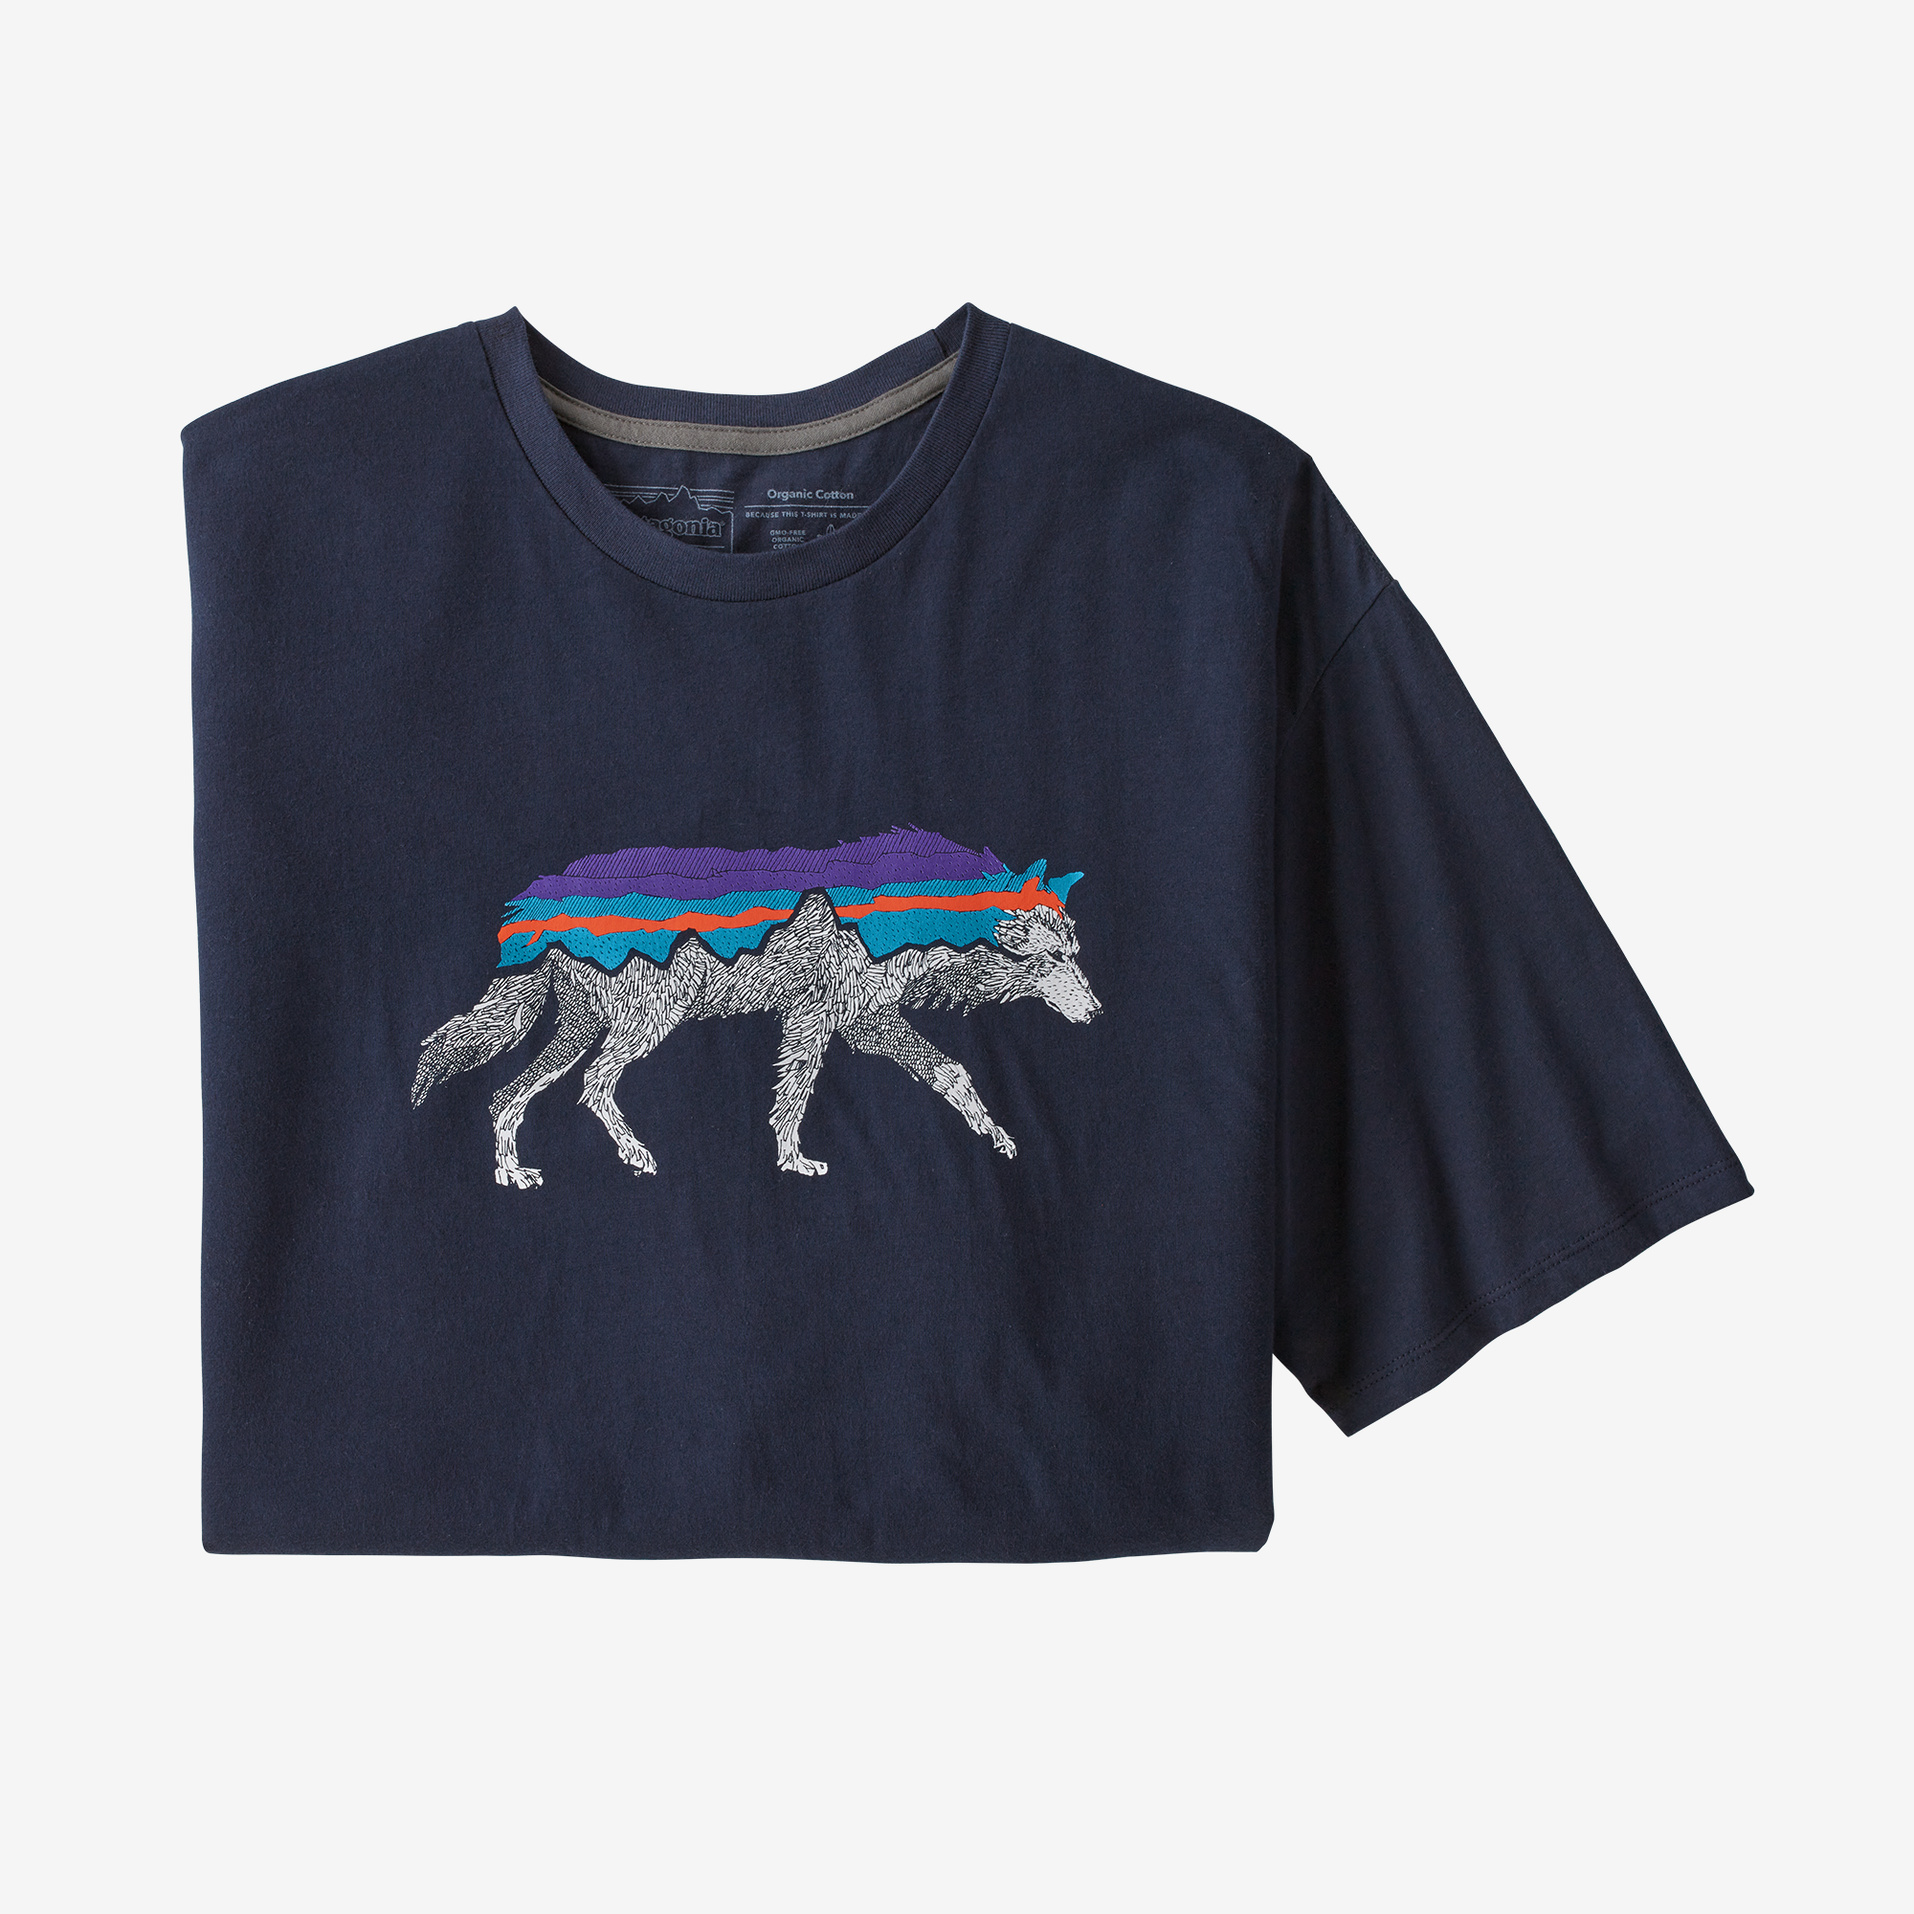 Patagonia M's Back For Good Organic T-Shirt - New Navy w/ Wolf - Small